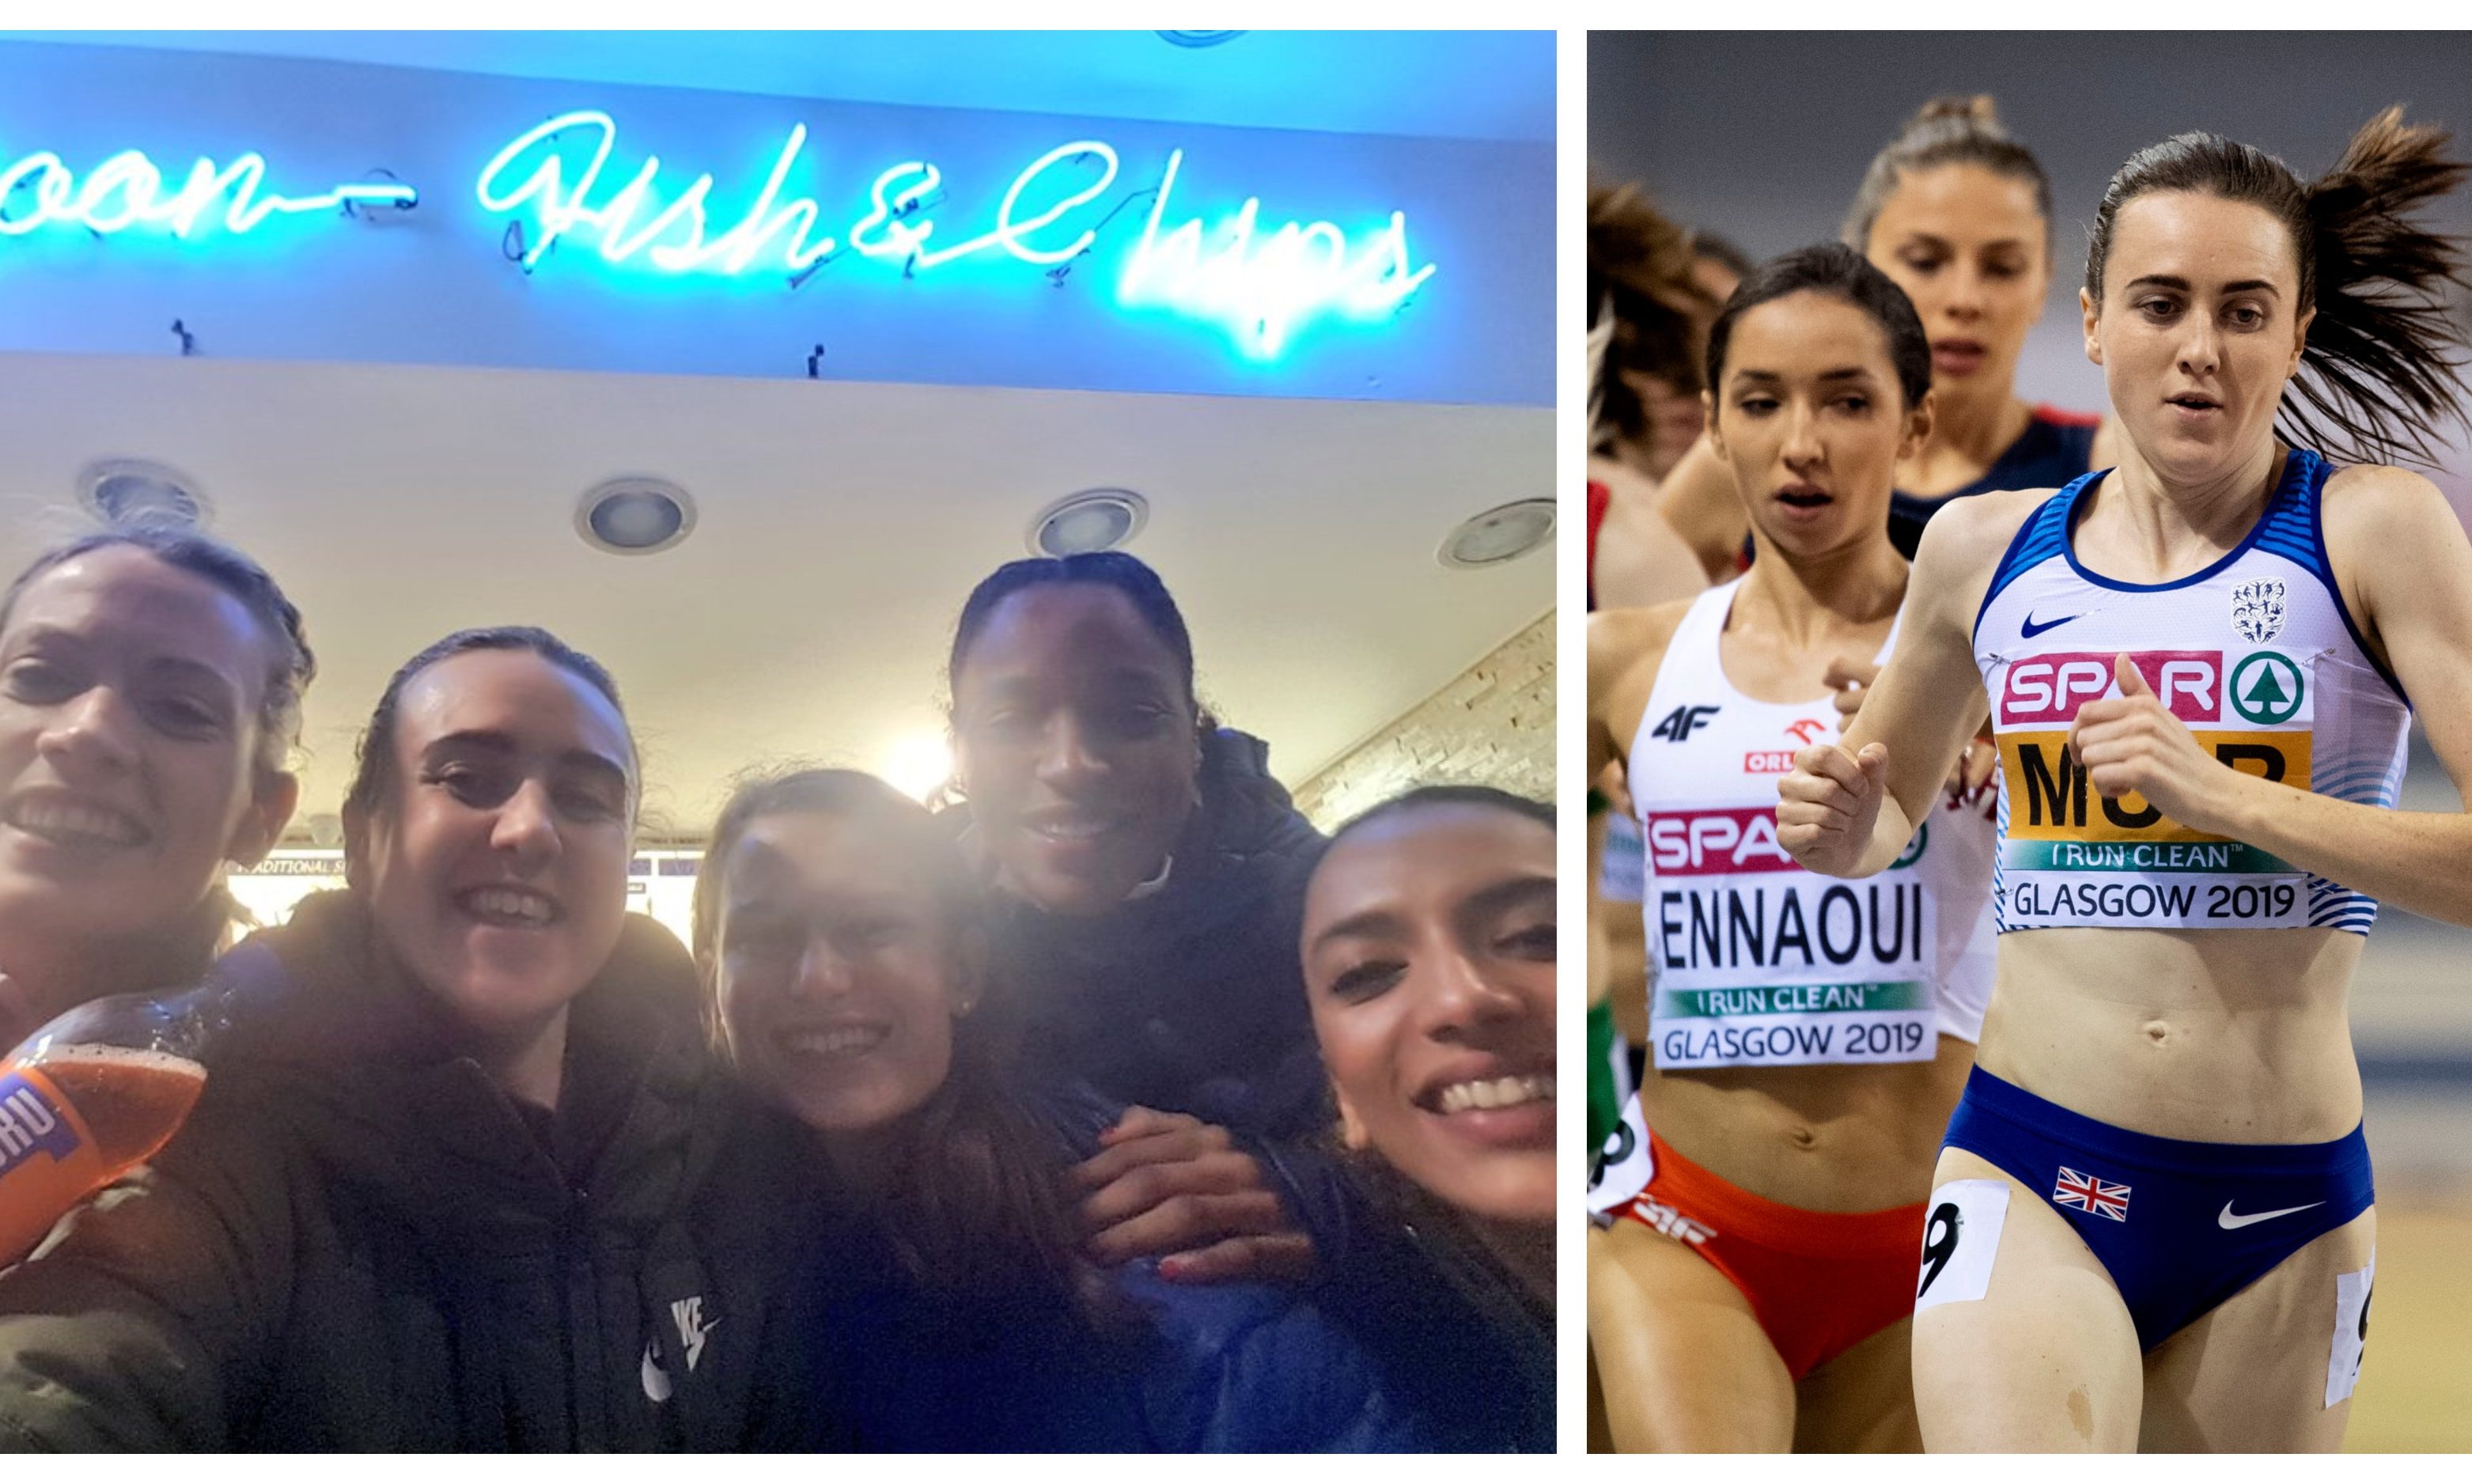 Laura Muir tweeted a photo from a Blue Lagoon fish and chip shop in Glasgow following her double gold medal performance.